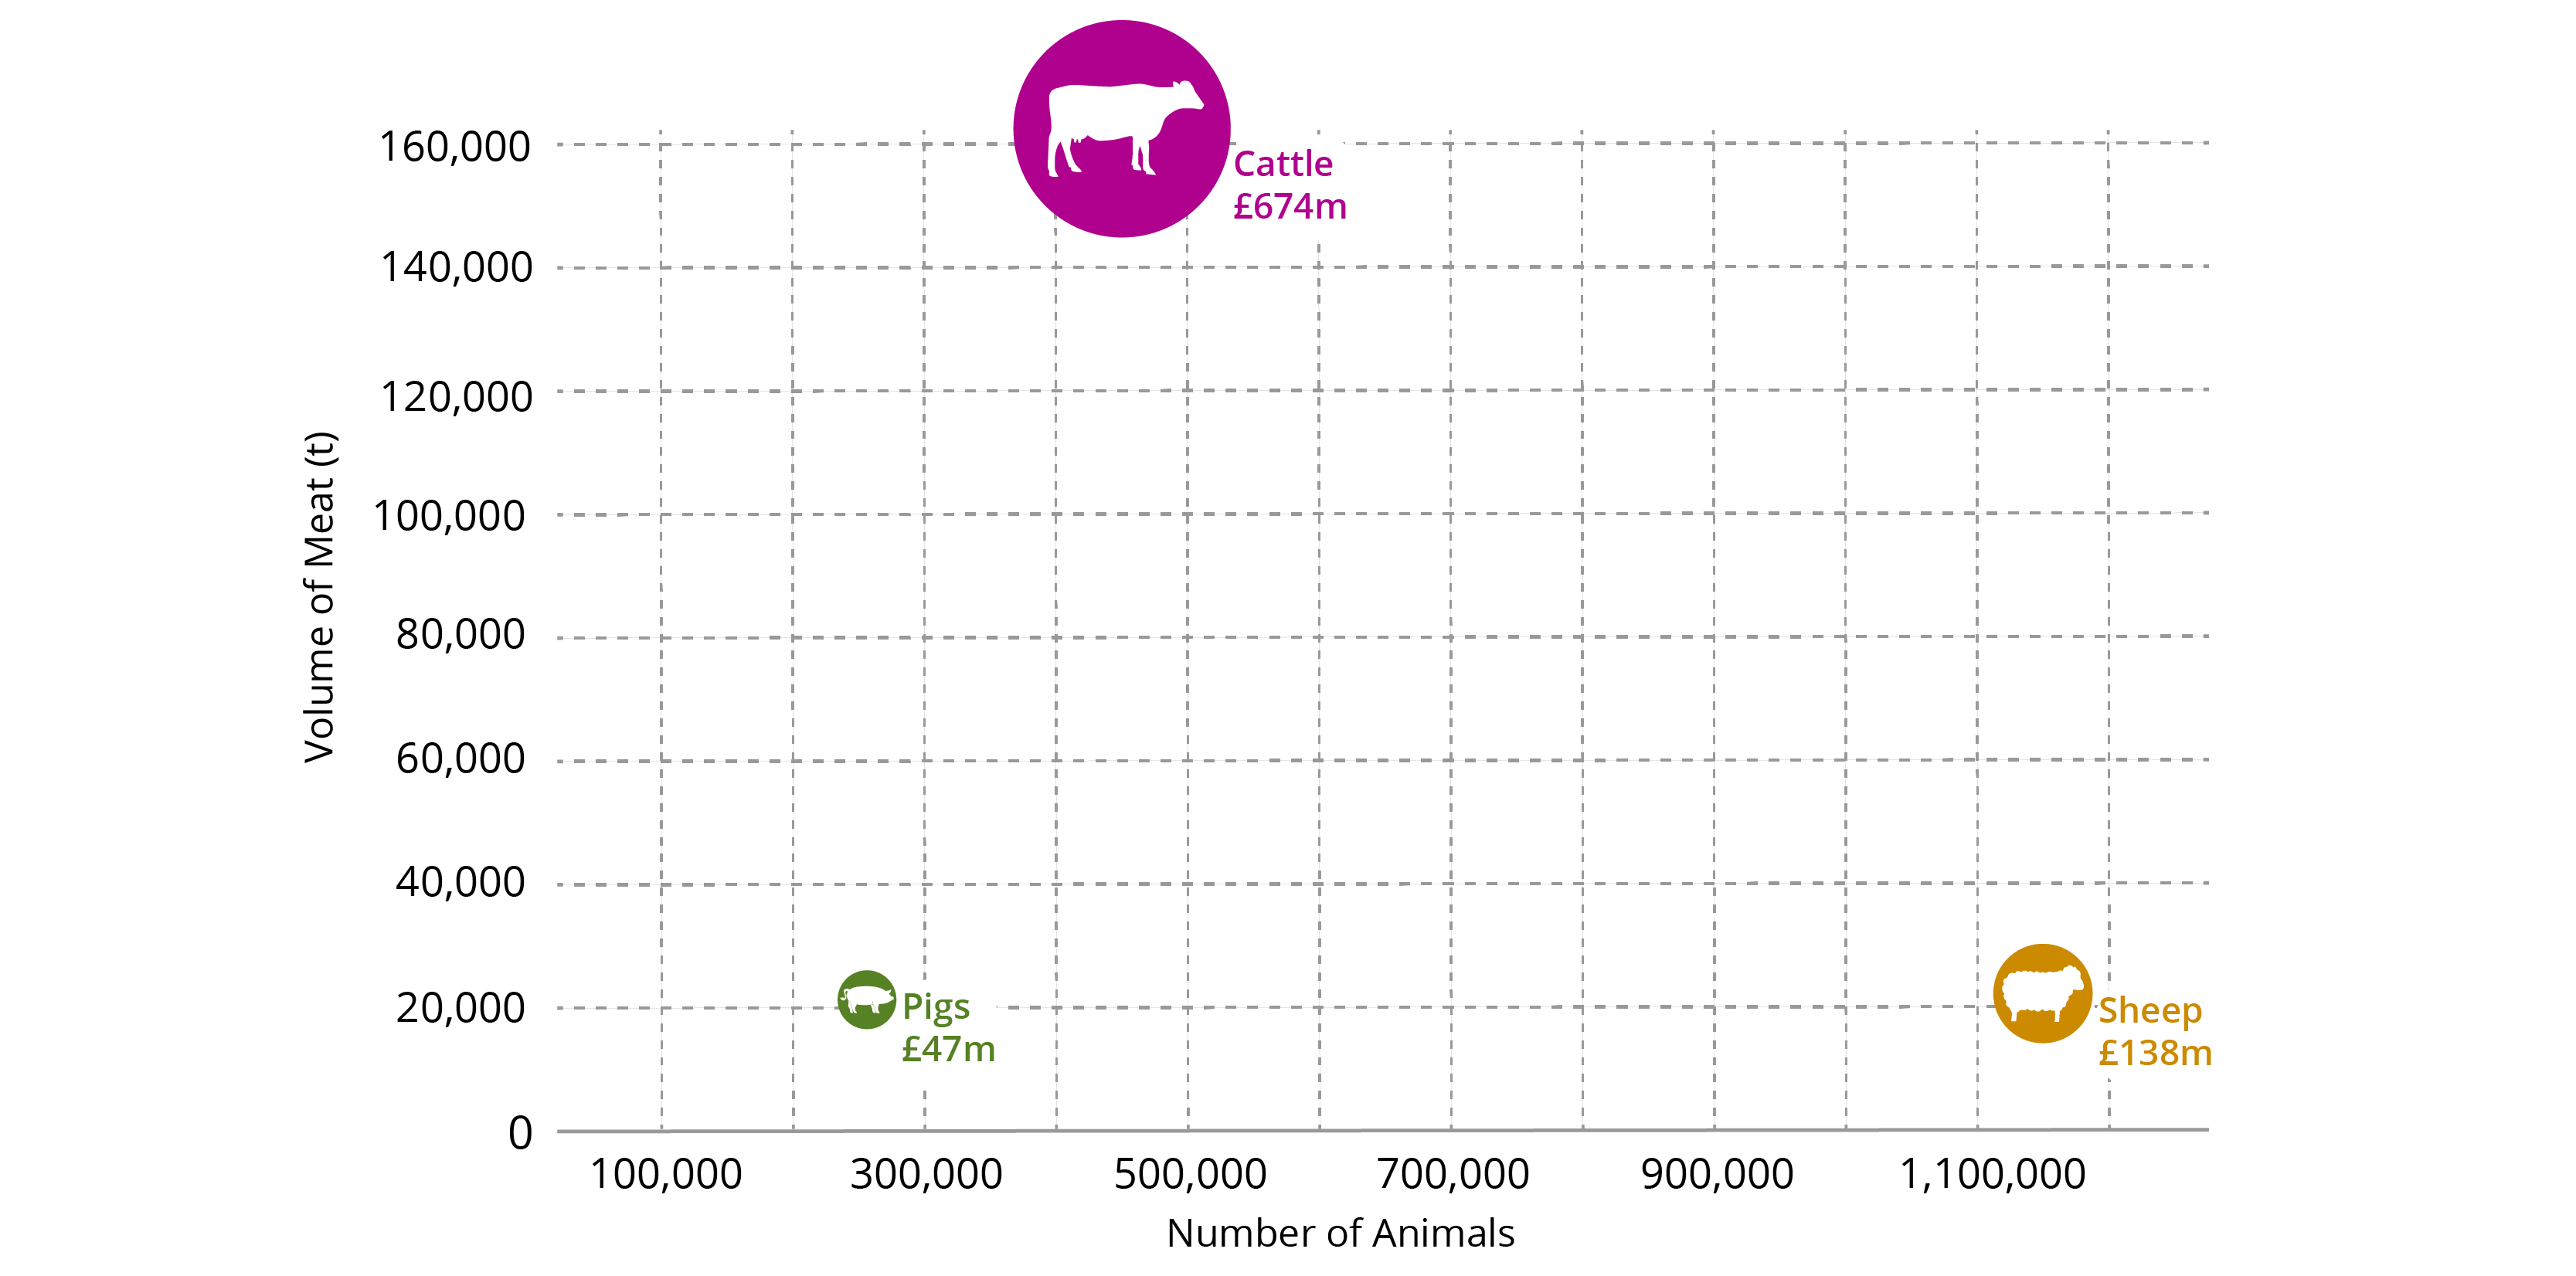 Meat production from Scotland's abattoirs in 2017